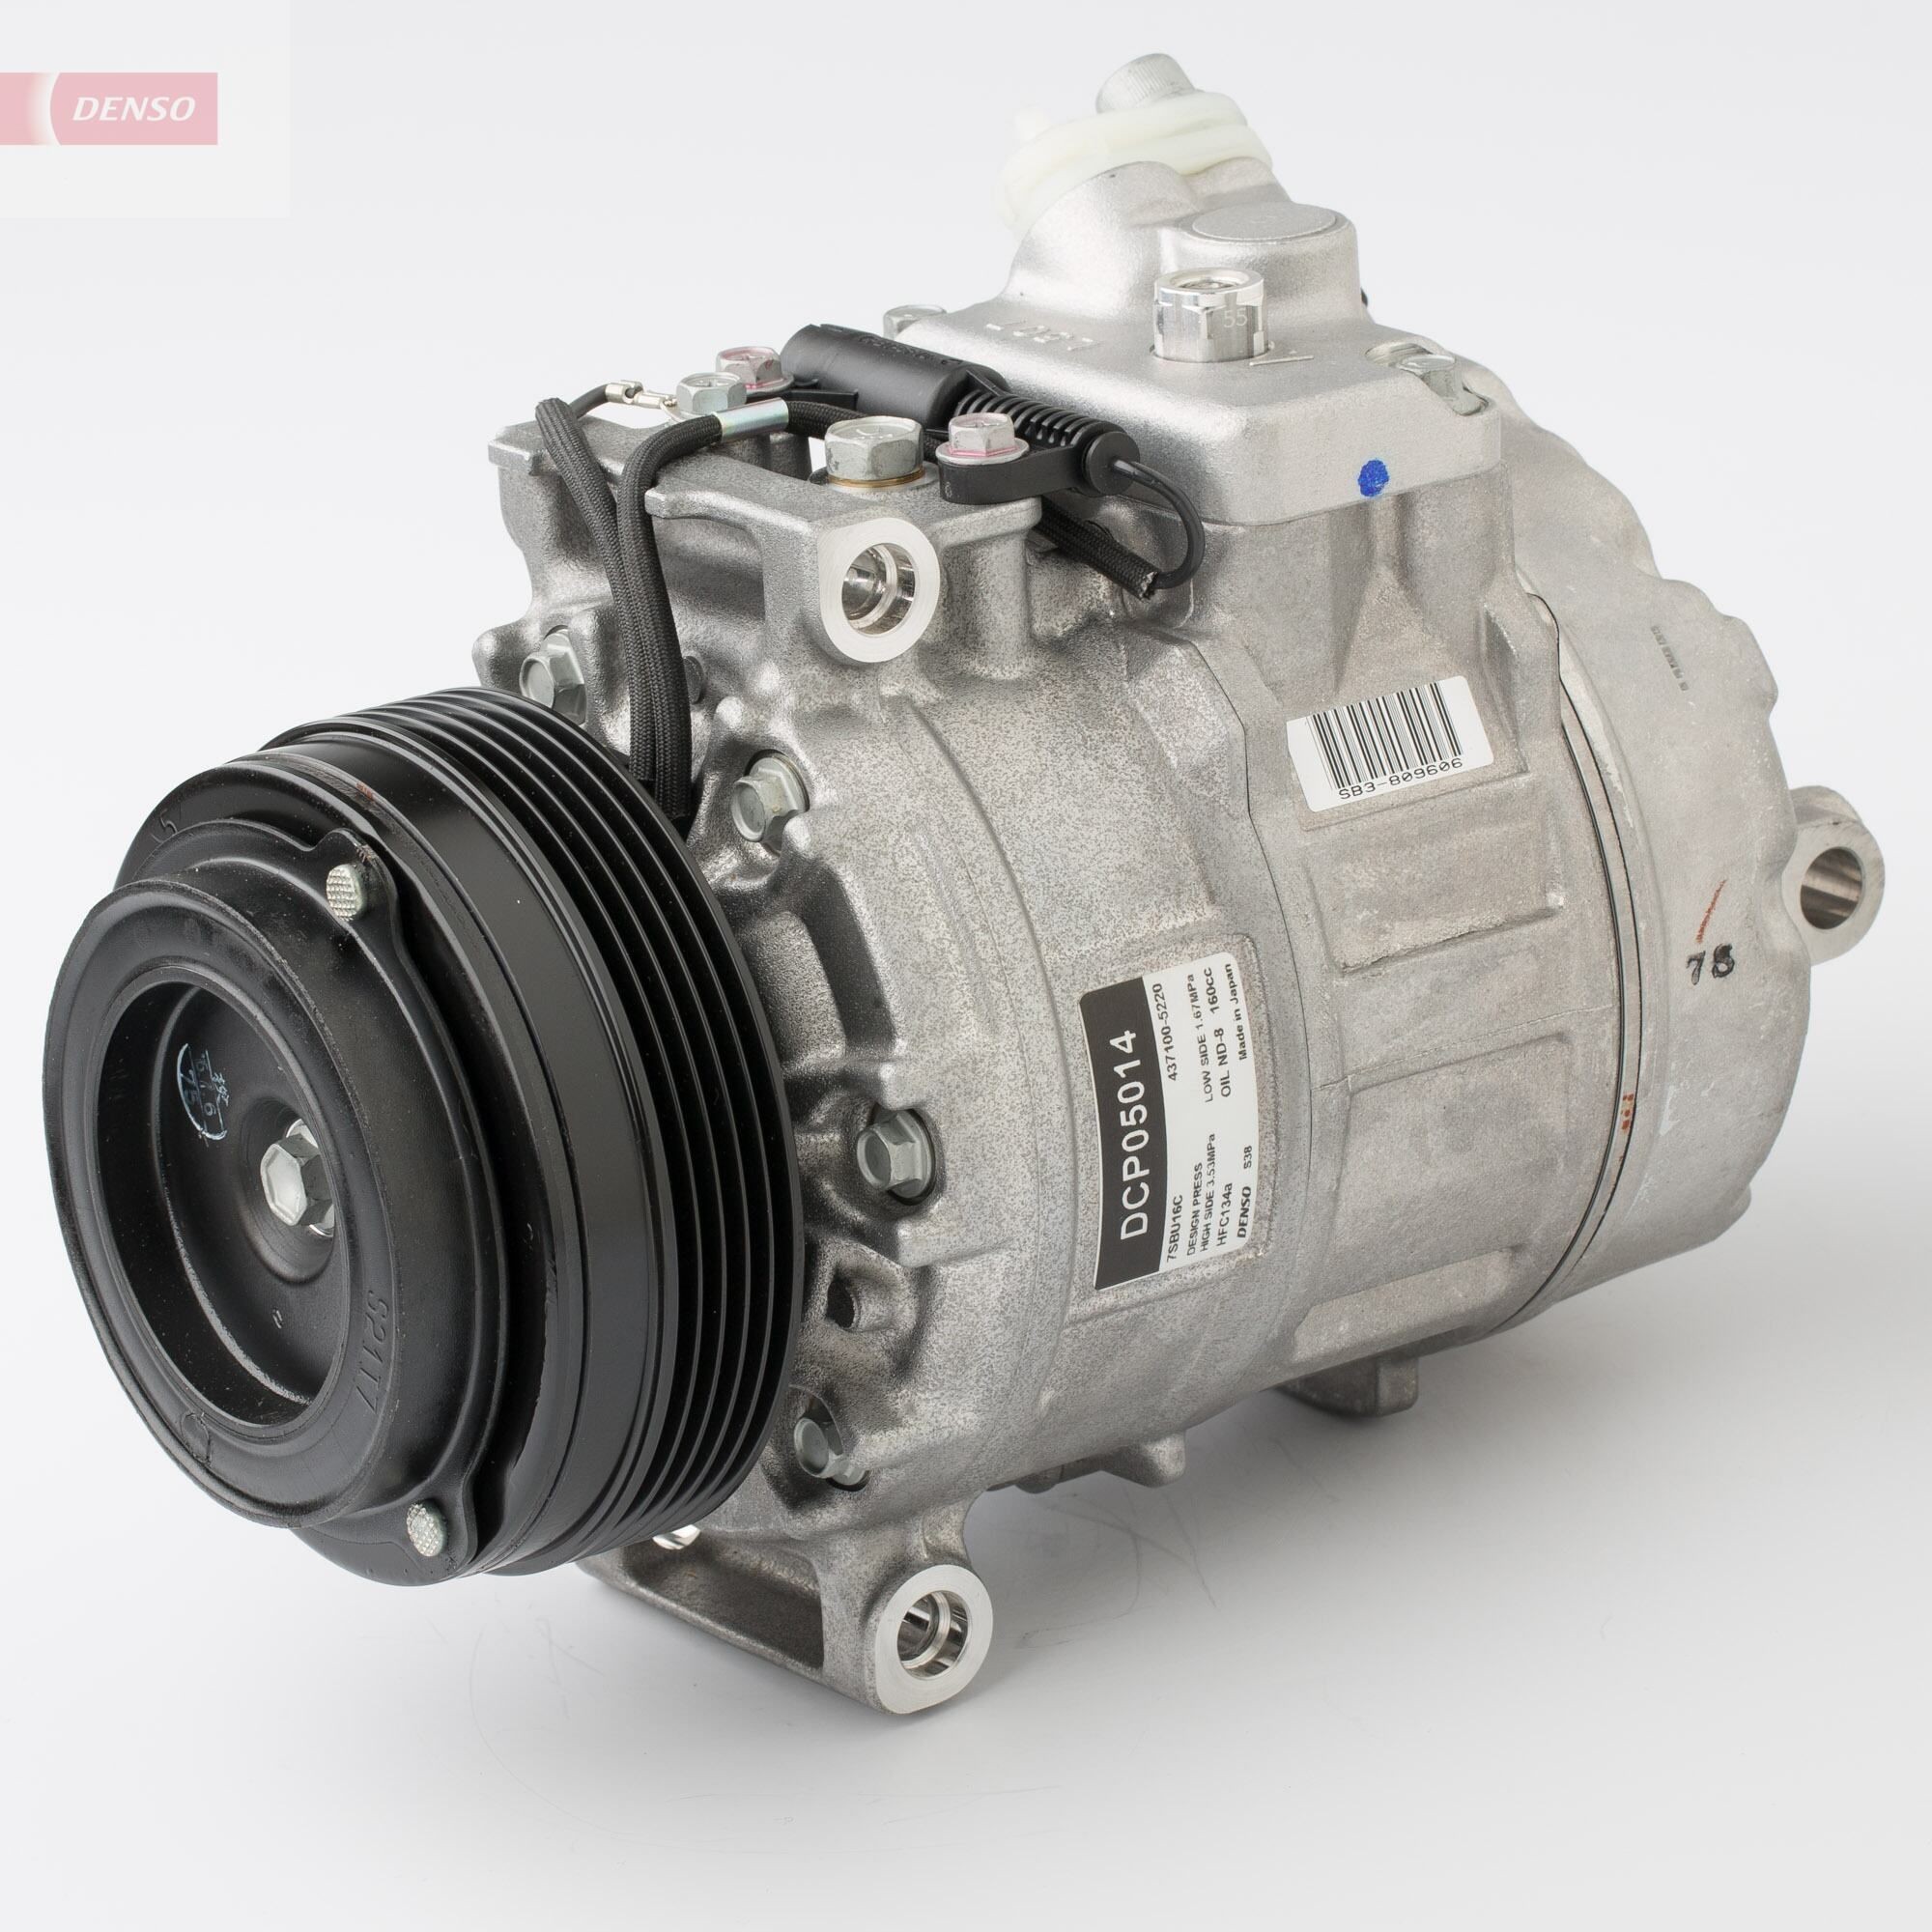 DENSO DCP05014 Air conditioning compressor 7SBU16C, 12V, PAG 46, R 134a, with magnetic clutch